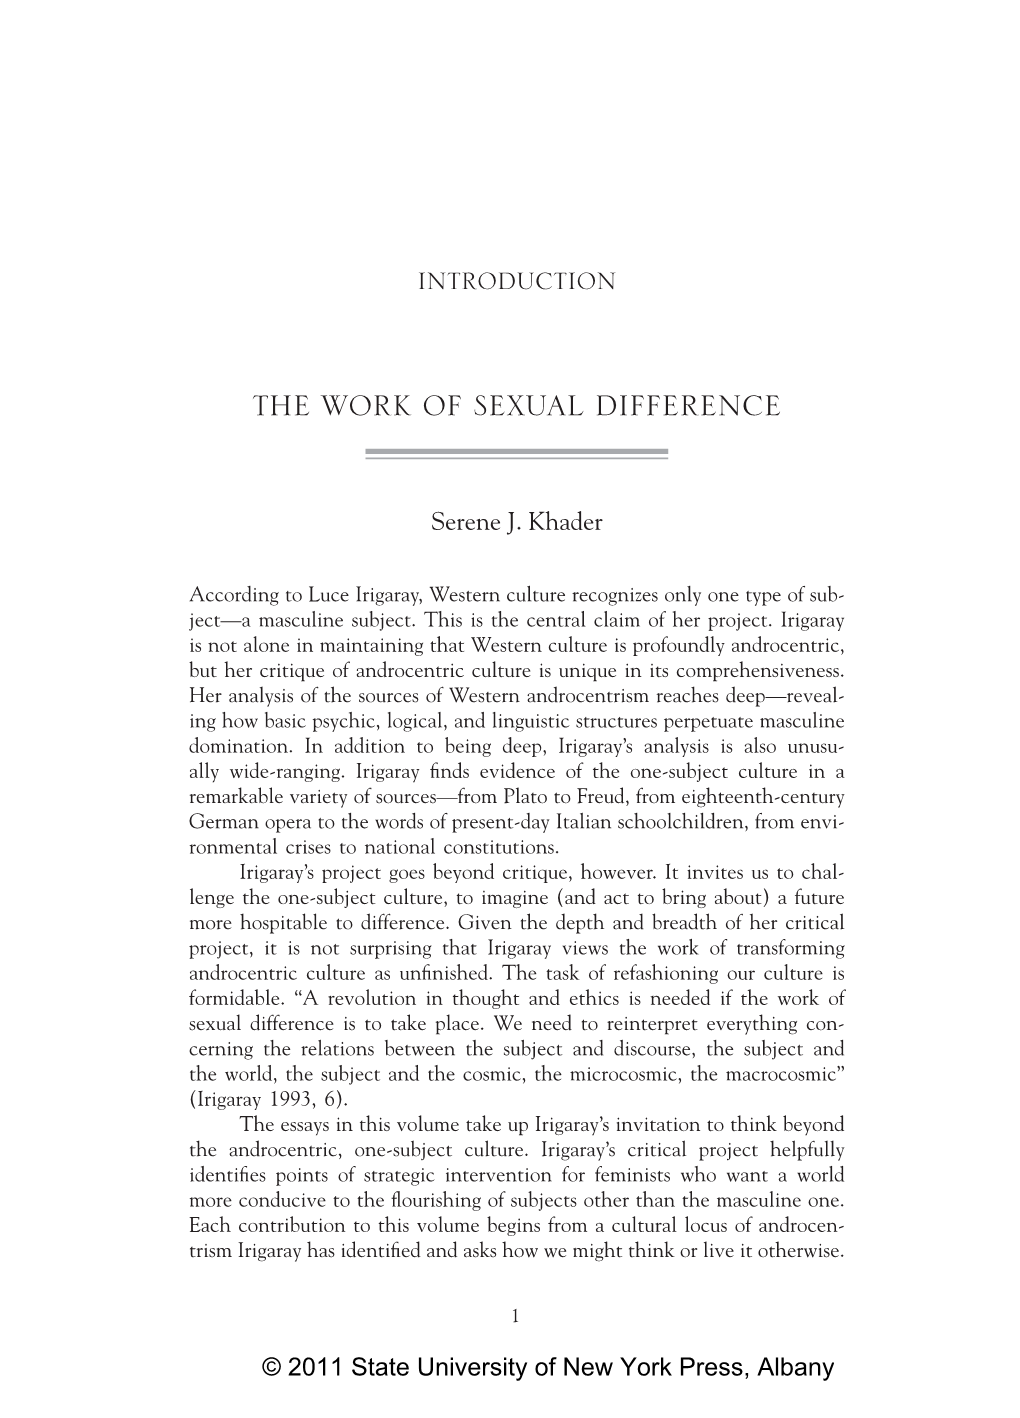 Luce Irigaray, Western Culture Recognizes Only One Type of Sub- Ject—A Masculine Subject